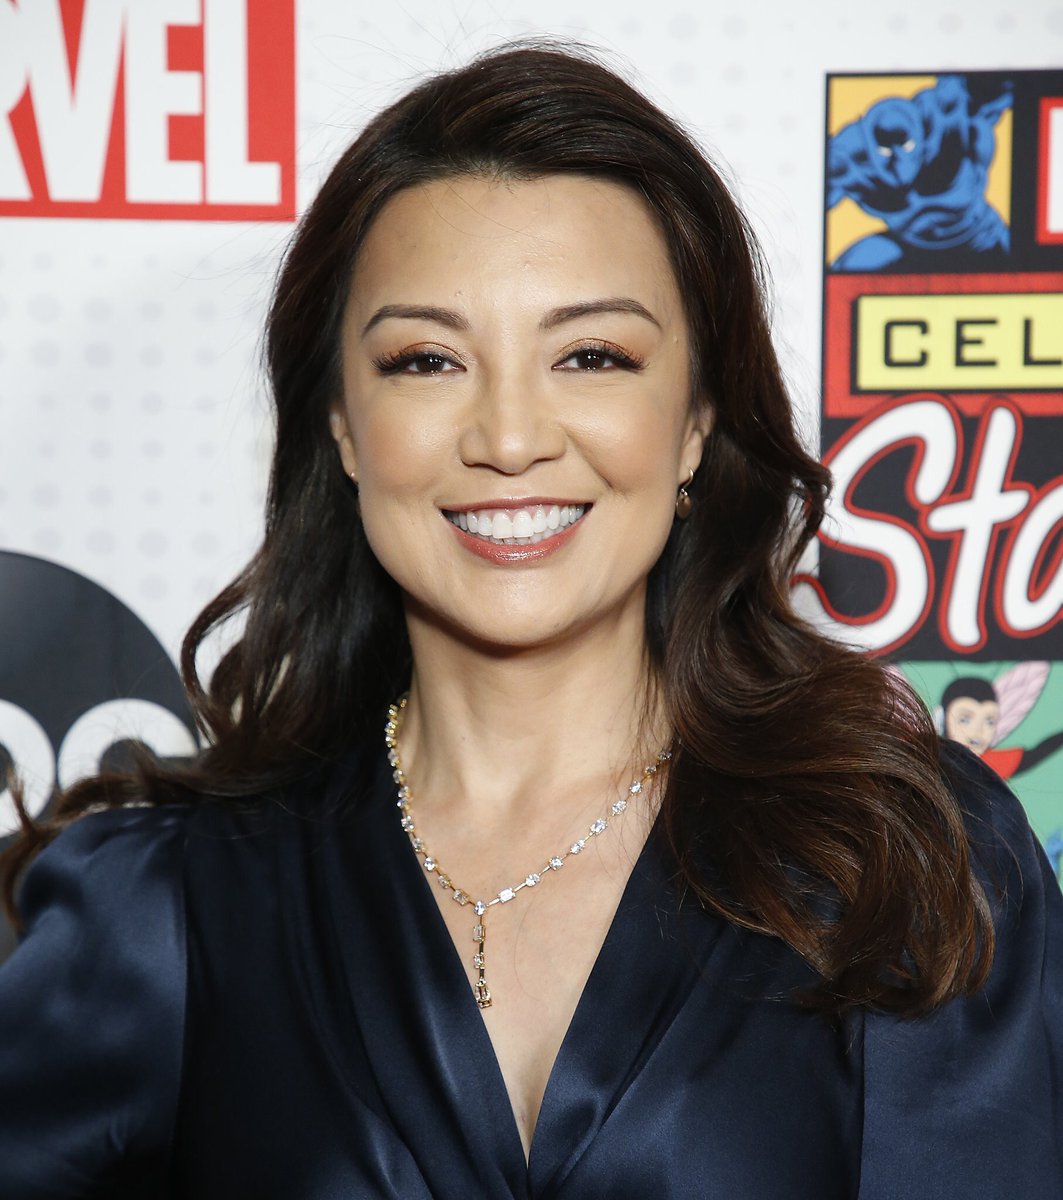 Ming Na Wen News On Twitter 50 States Of Fright Ming Na